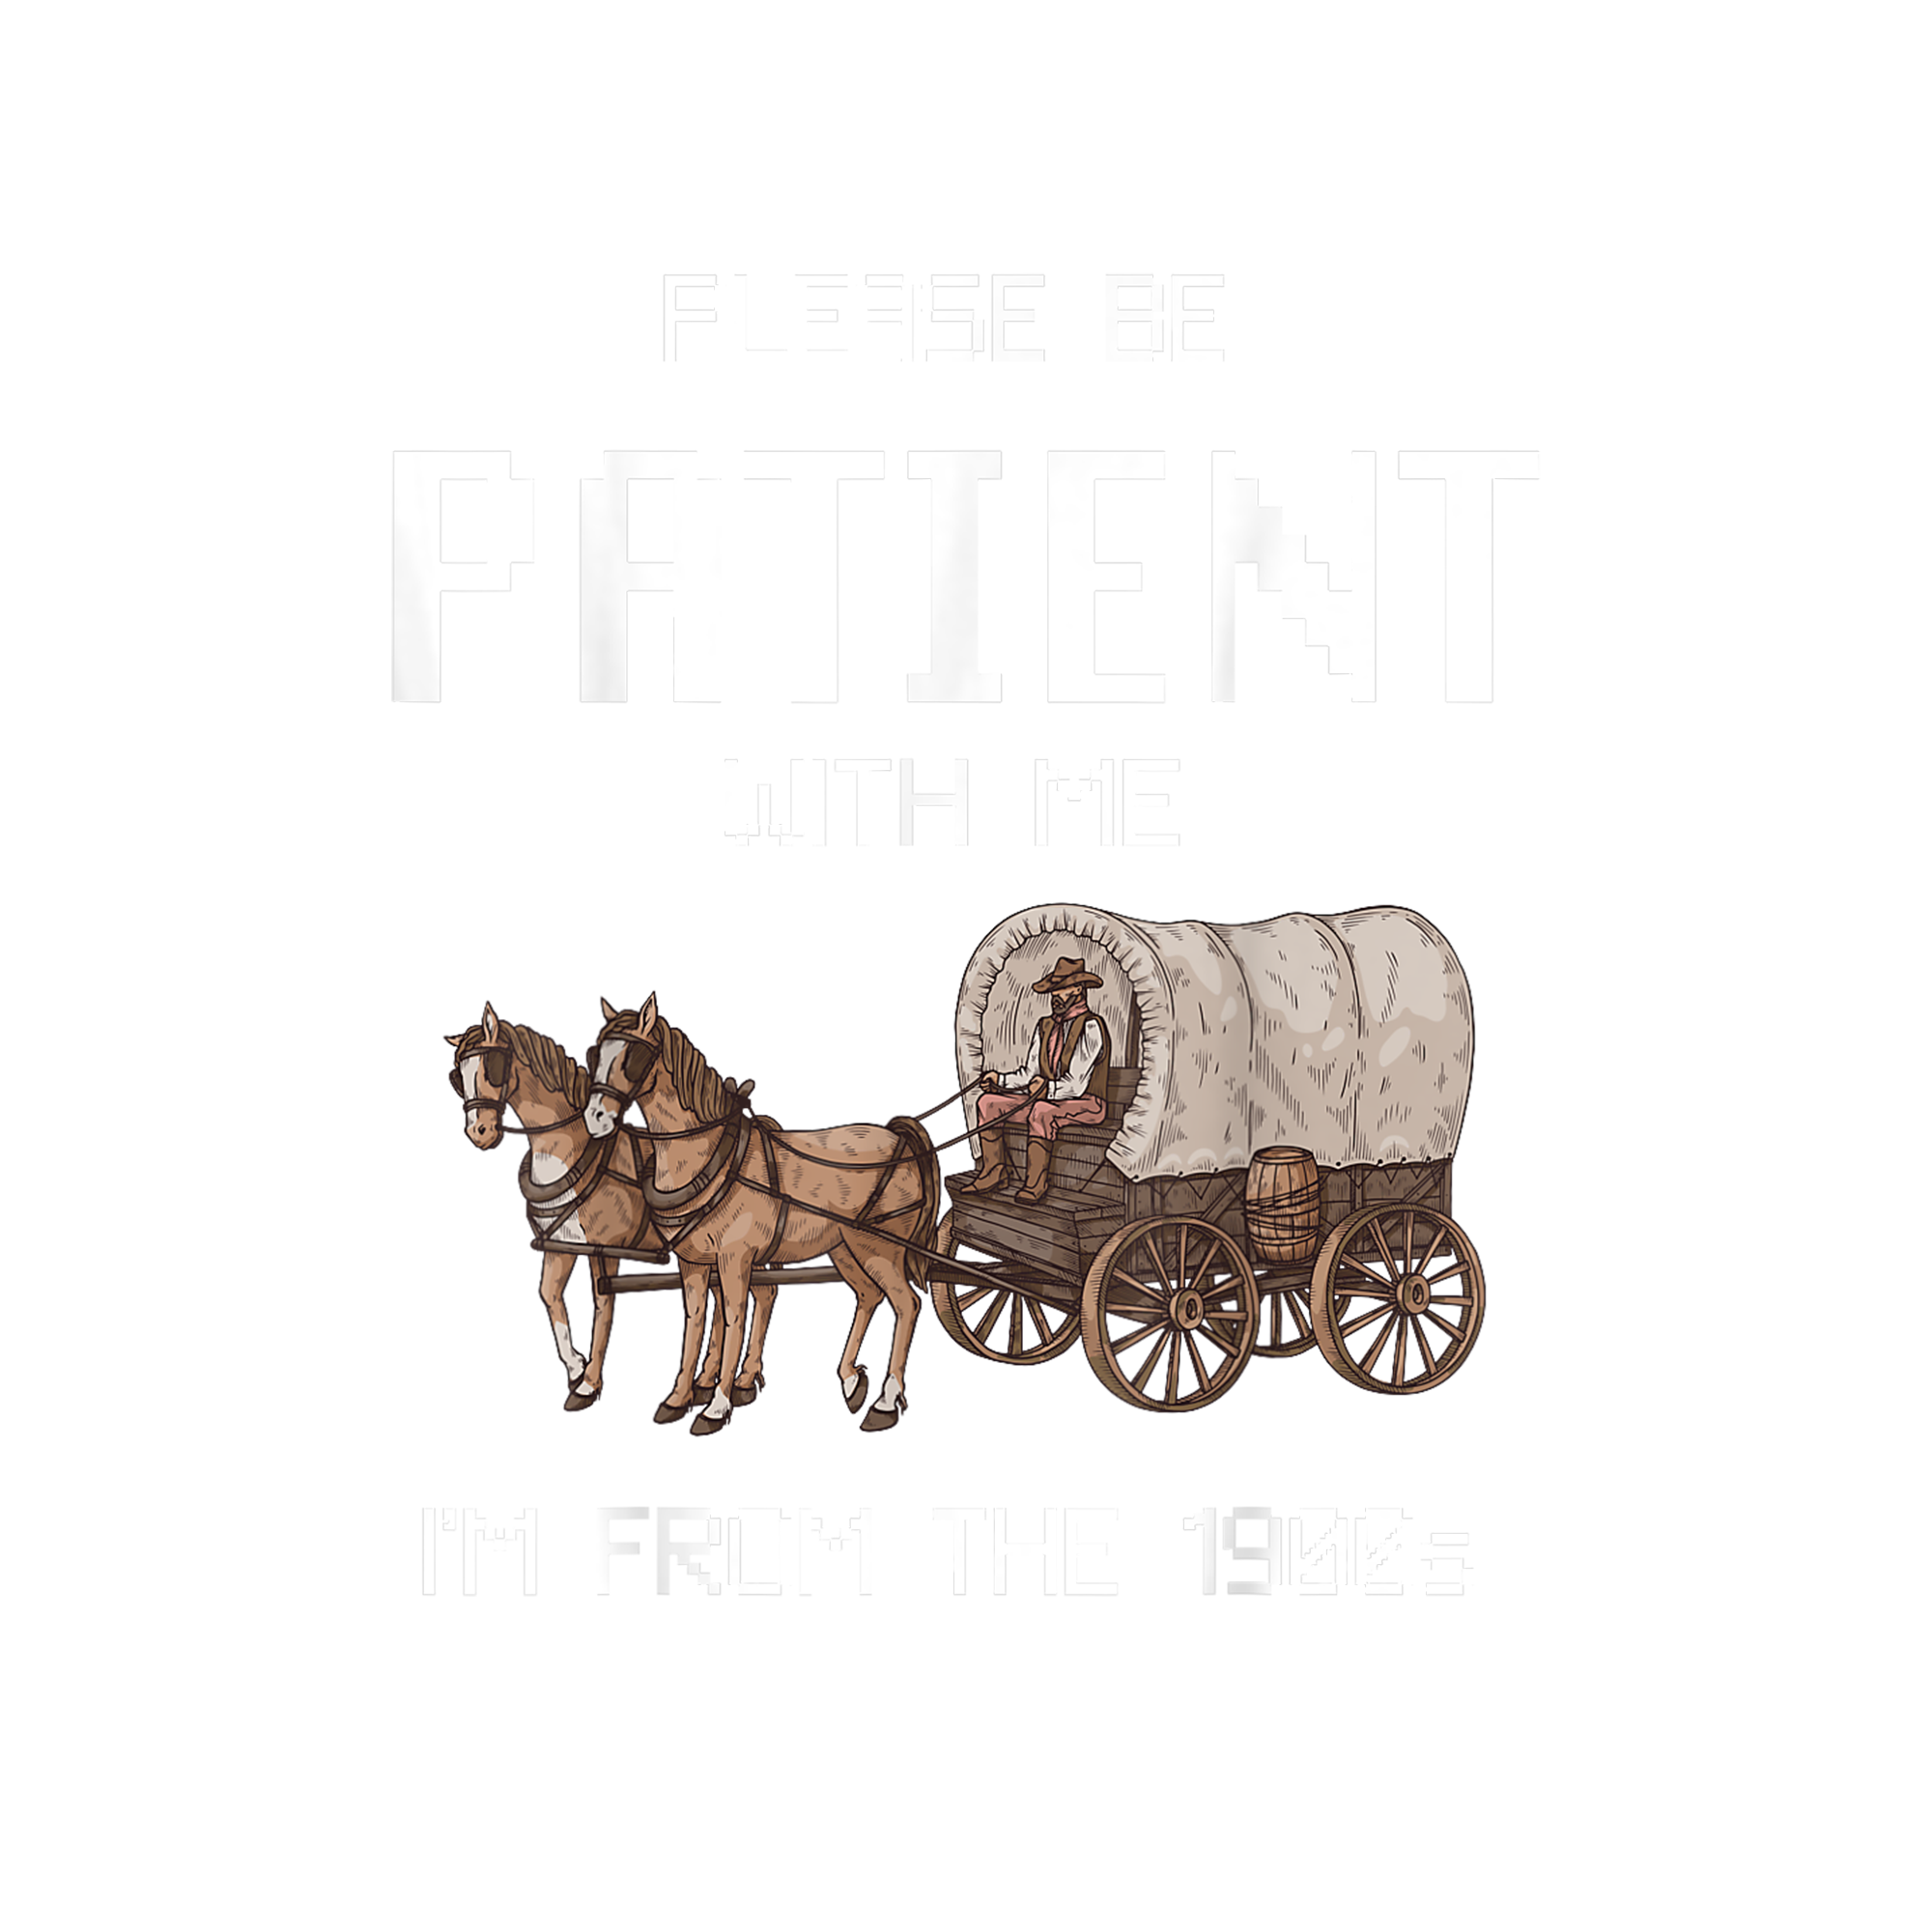 PLEASE BE PATIENT WITH ME